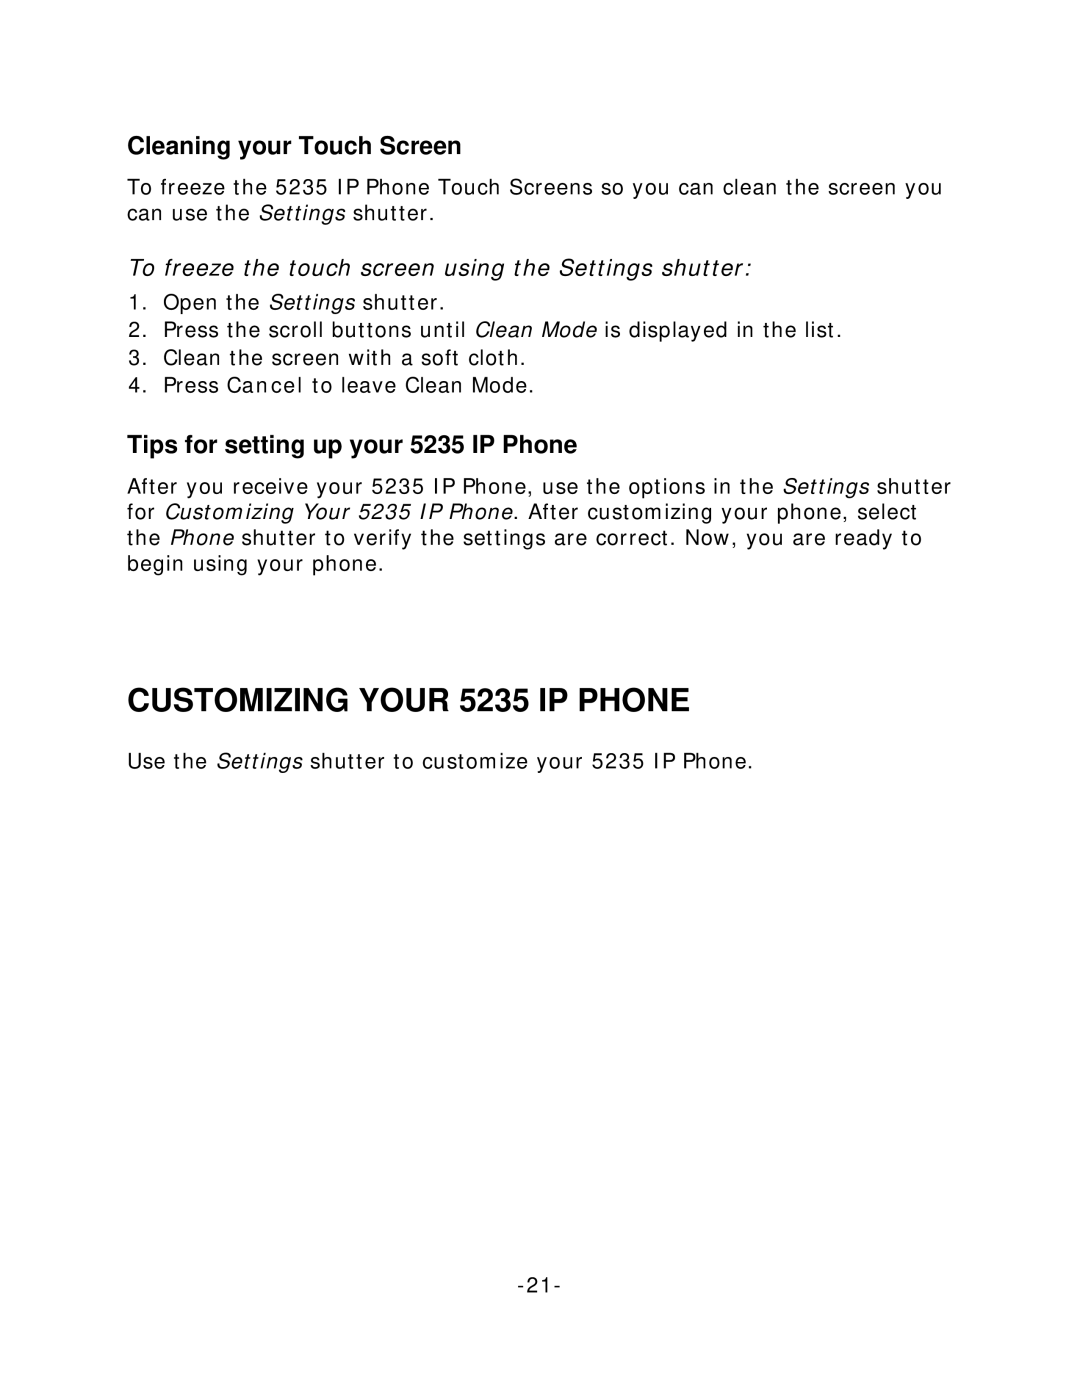 Mitel manual CUSTOMIZING YOUR 5235 IP PHONE, Cleaning your Touch Screen, Tips for setting up your 5235 IP Phone 